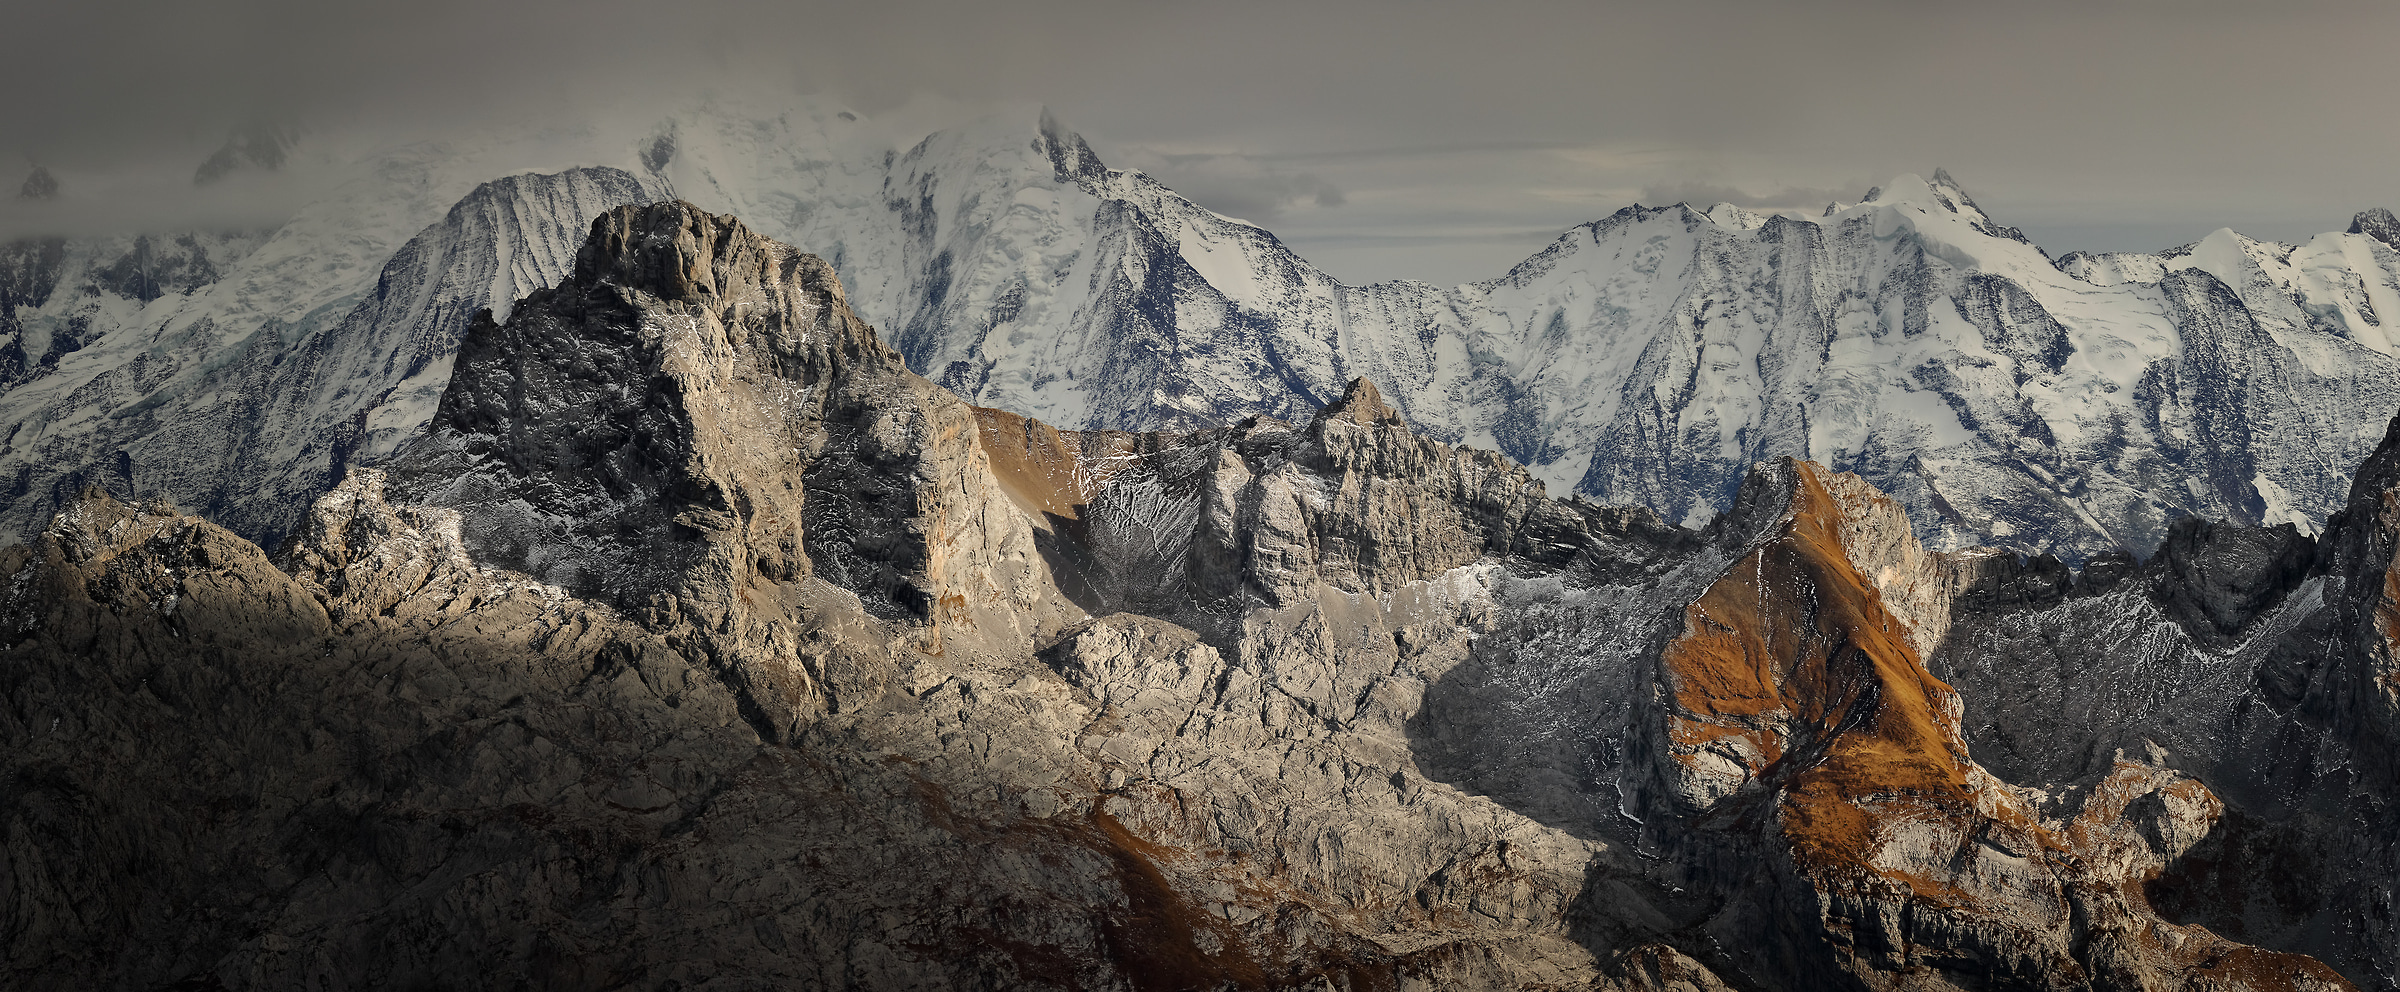 111 megapixels! A very high resolution, large-format VAST photo of mountains in France; created by Alexandre Deschaumes in Jallouvre Summit, Haute Savoie, France.